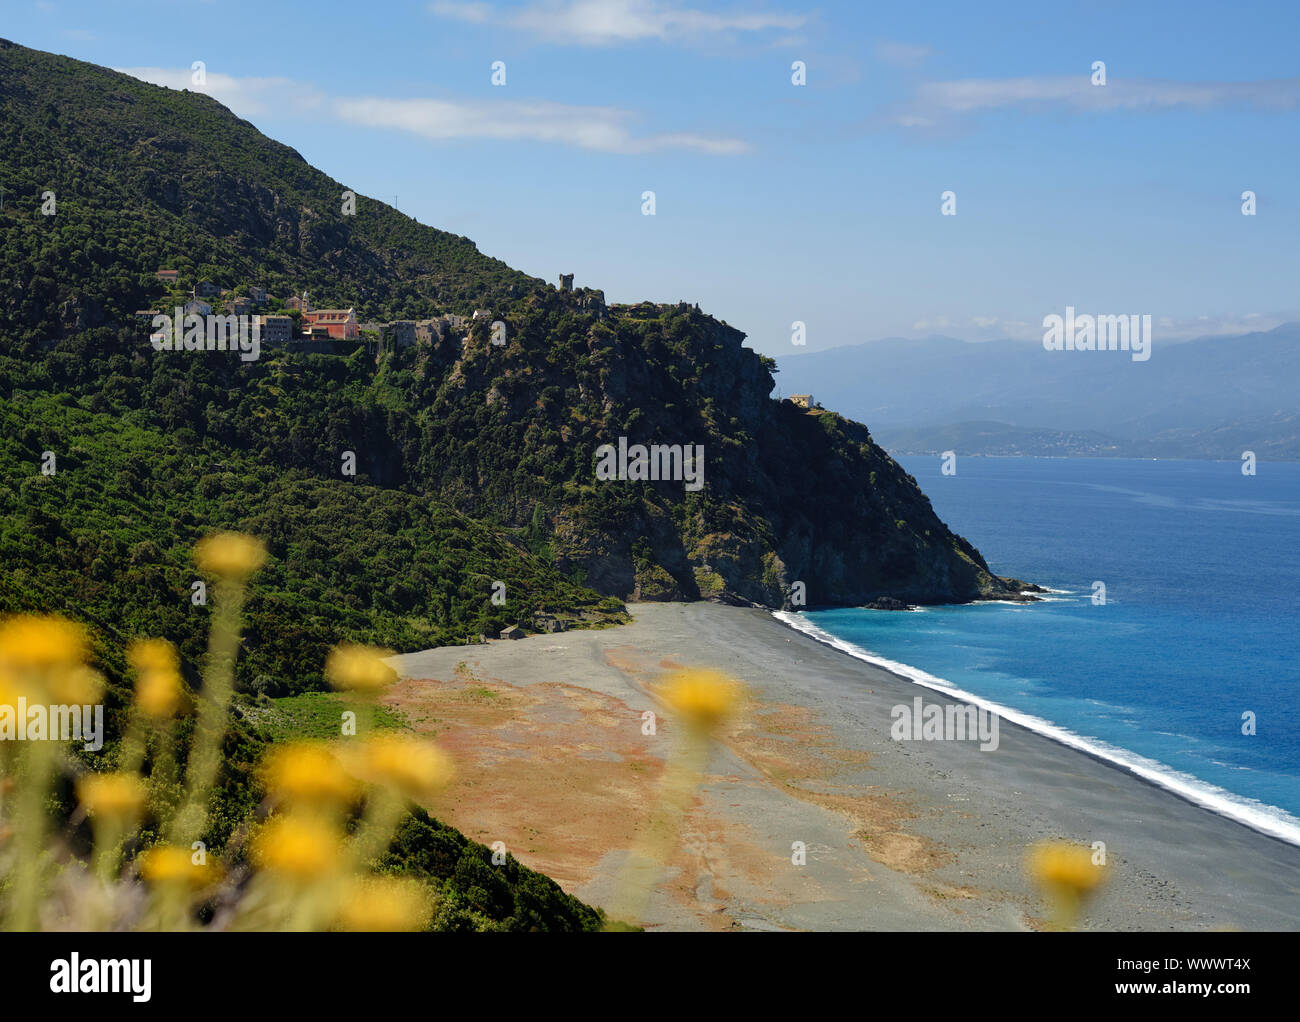 Nonza hilltop village and beach landscape in the Haute-Corse department Cap Corse north Corsica France with yellow flowers in the foreground. Stock Photo